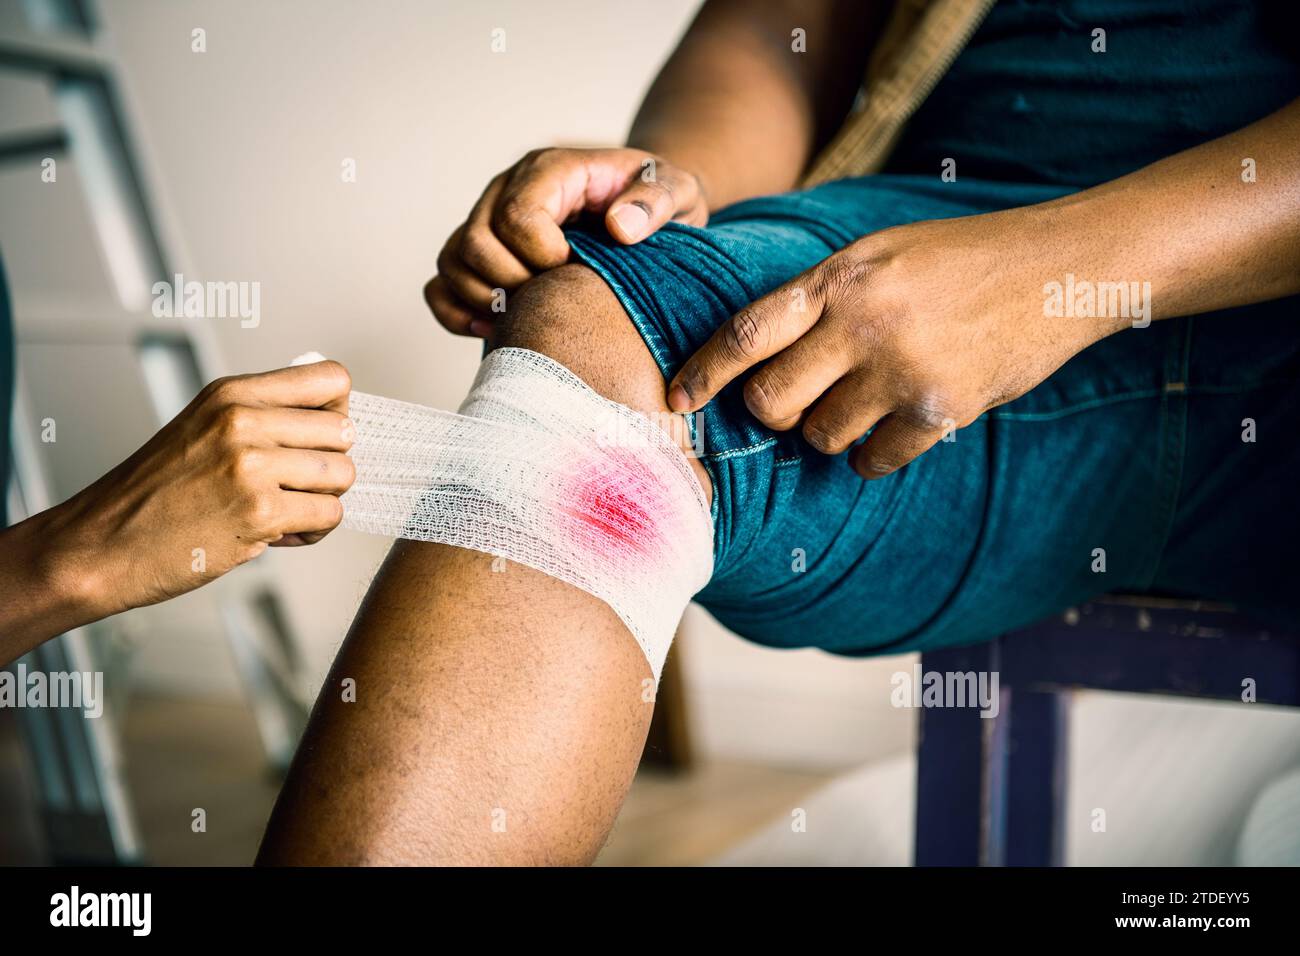 People with home safety and First Aid concept Stock Photo